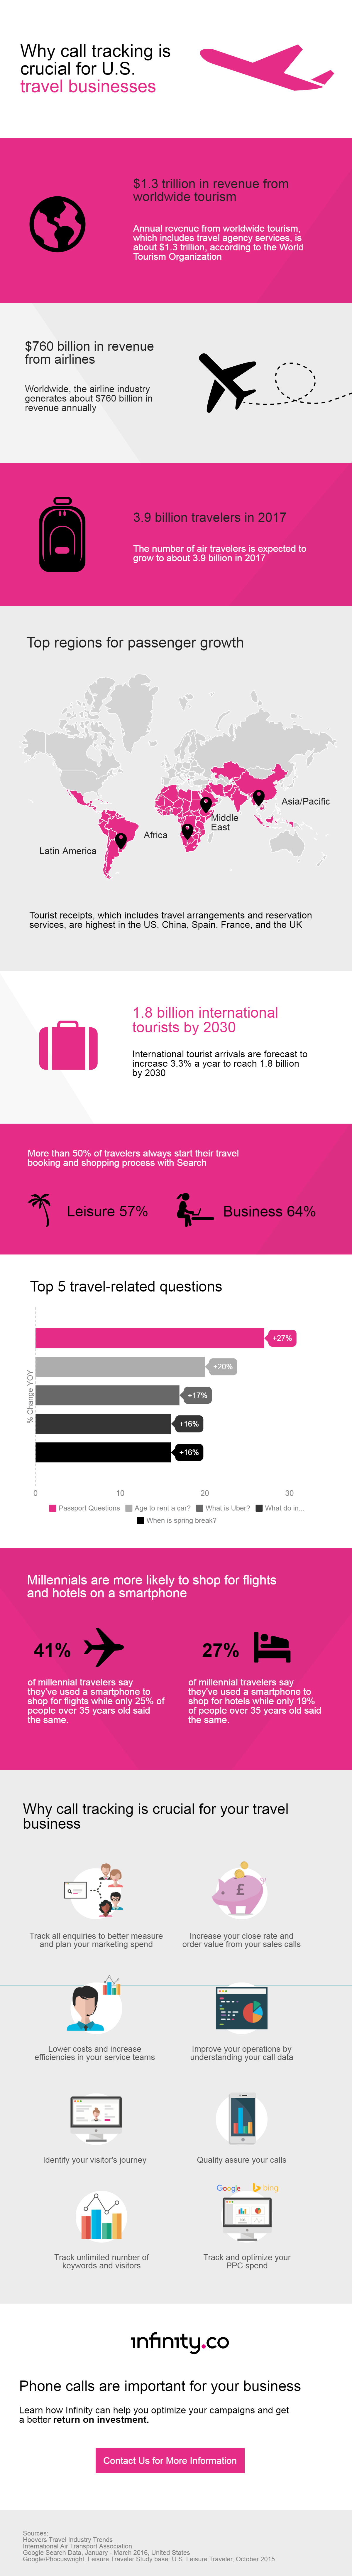 us-travel-industry-trends-infographic-american-english.png